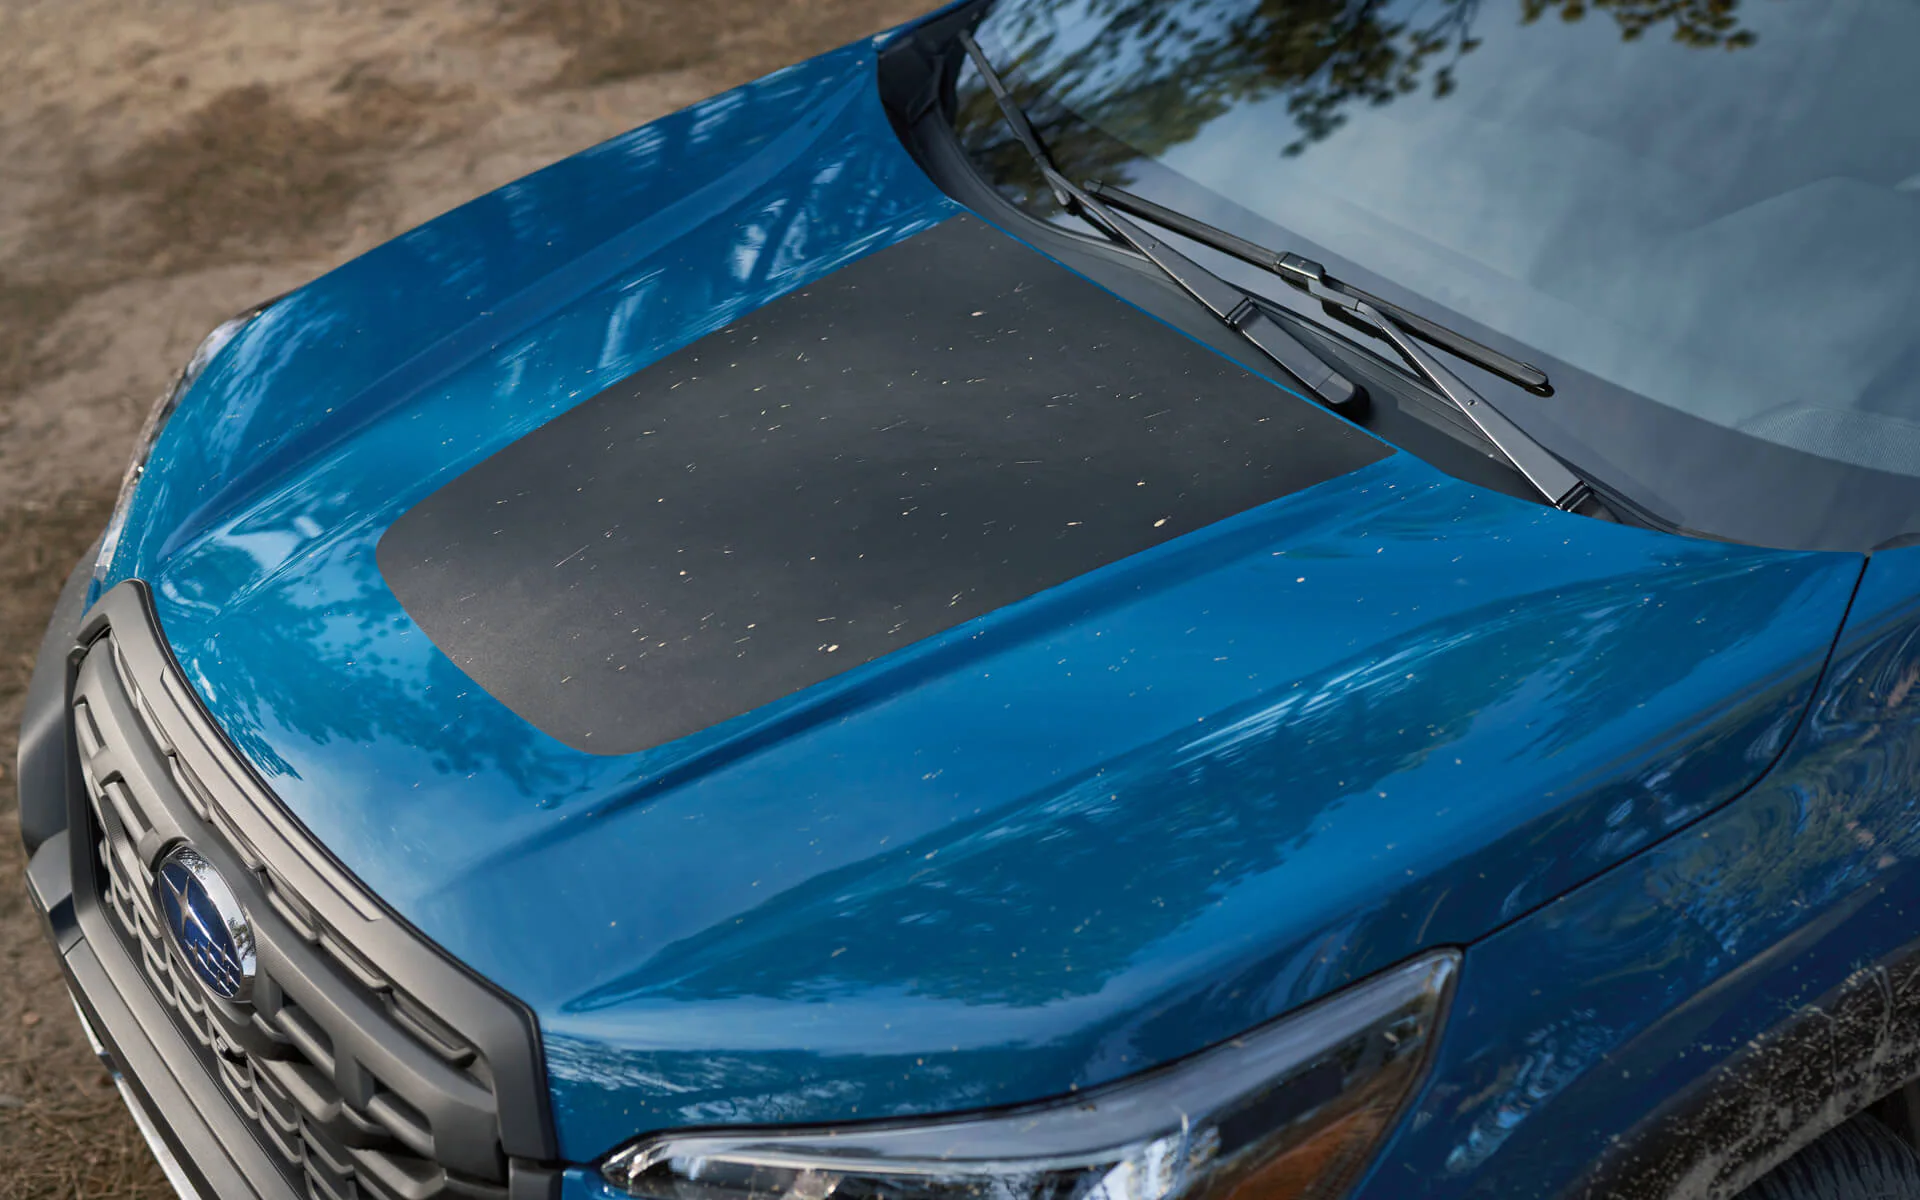 A close up of the anti-glare hood finish on the 2022 Subaru Forester Wilderness.